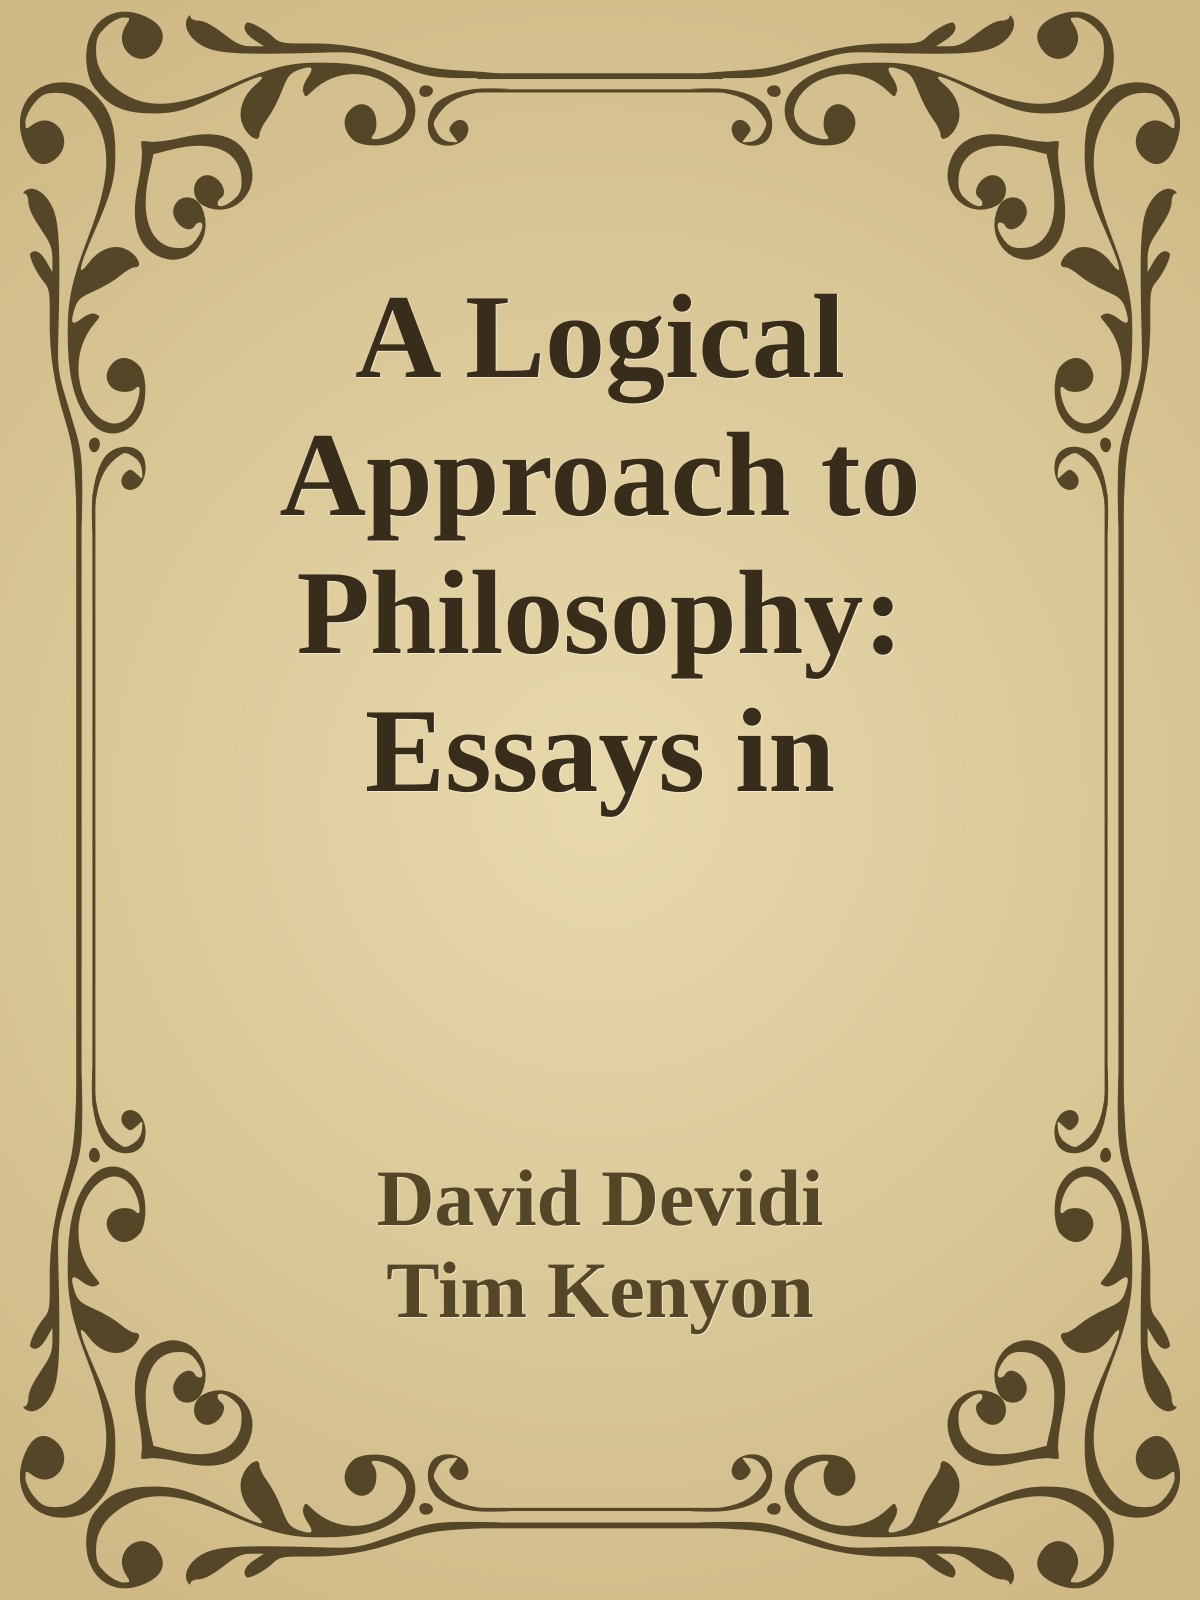 A Logical Approach to Philosophy: Essays in Honour of Graham Solomon